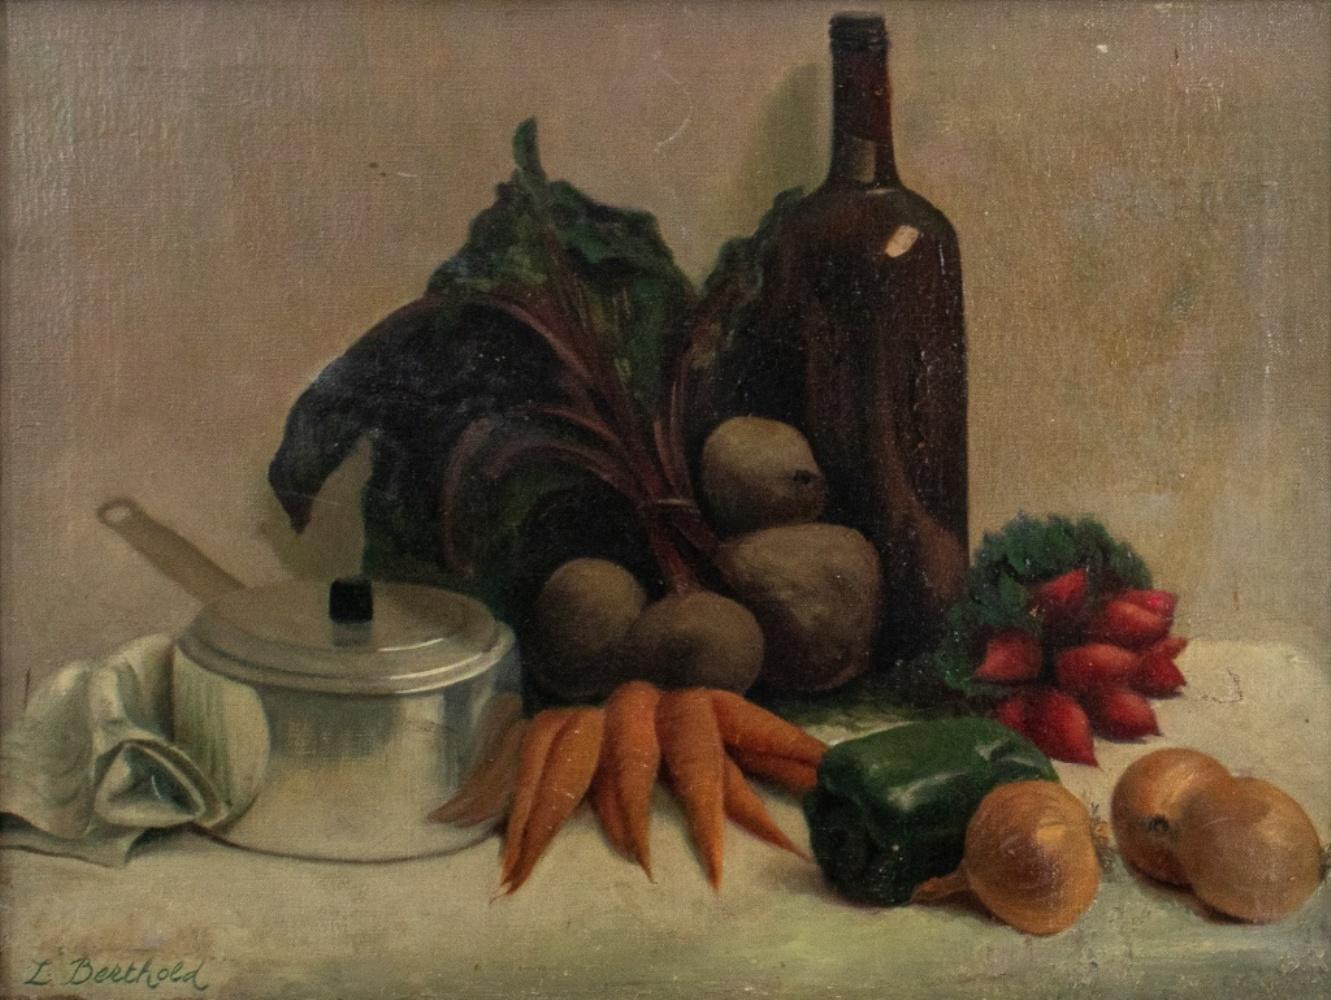 Realistic still life oil on canvas painting depicting onions, beets, onions, carrots, a pot, a bottle of red wine, and a green pepper, signed 